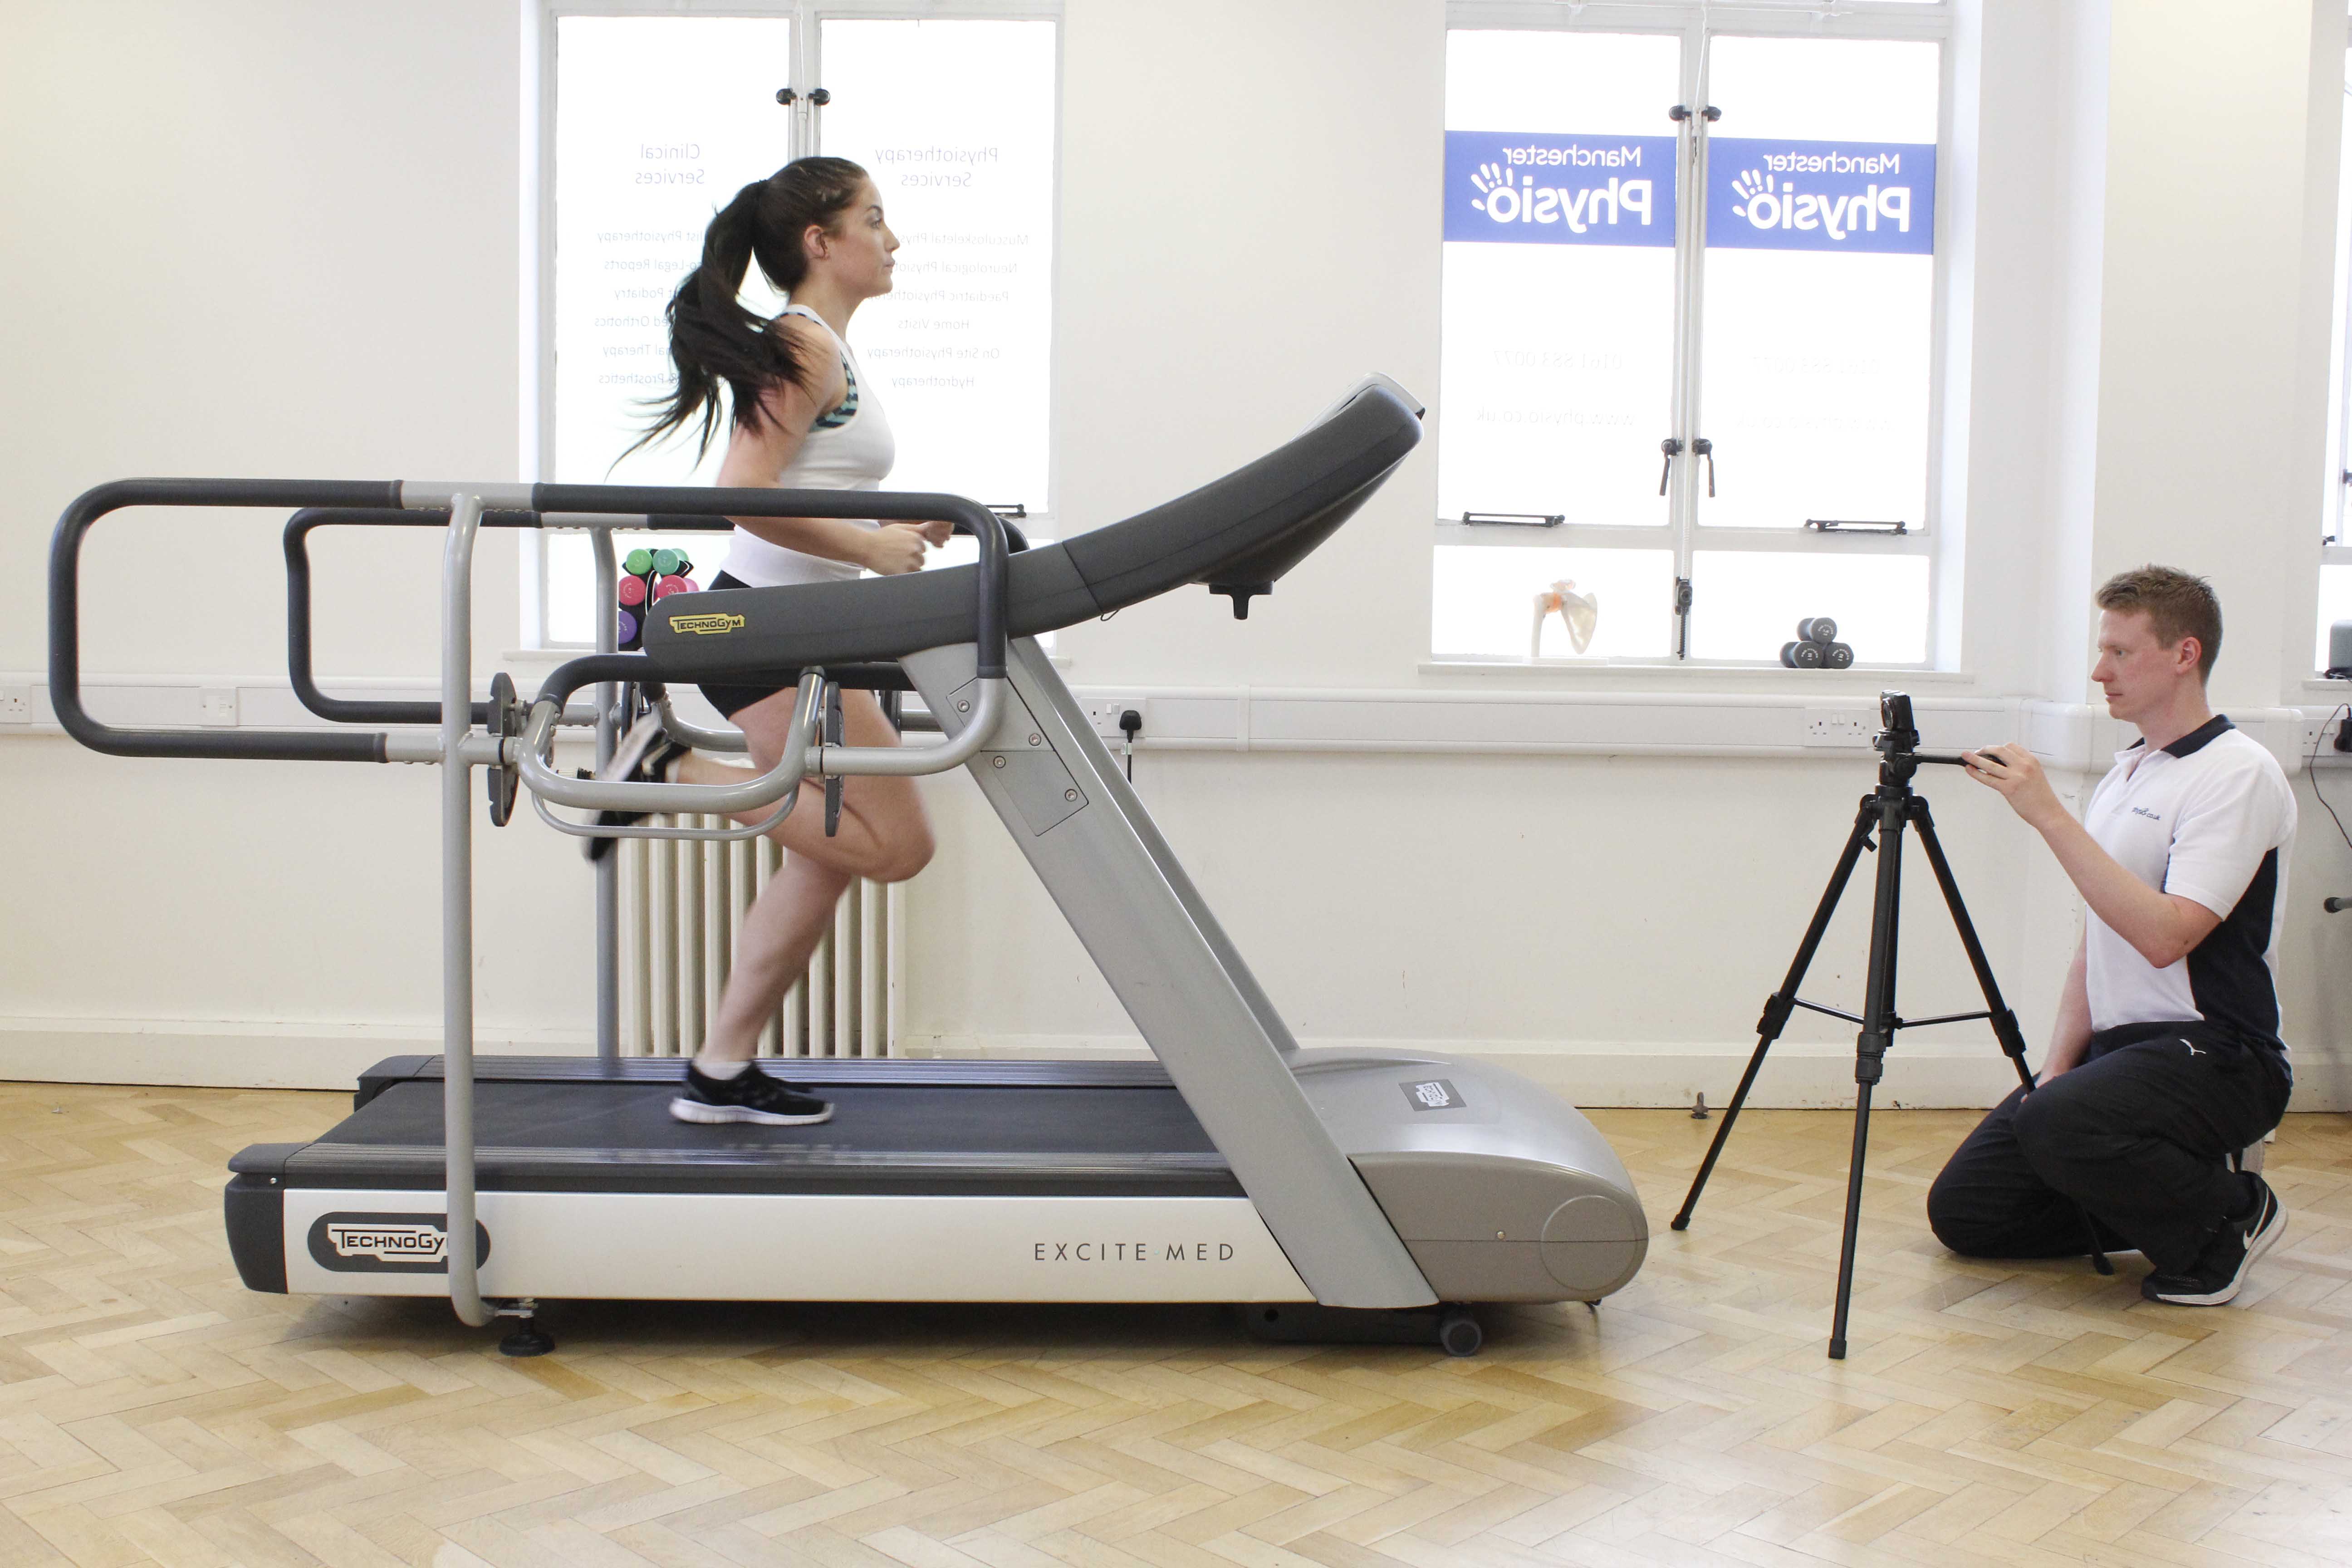 Video recordings provide support to help you visually break down your gait in order to identify areas of weakness,